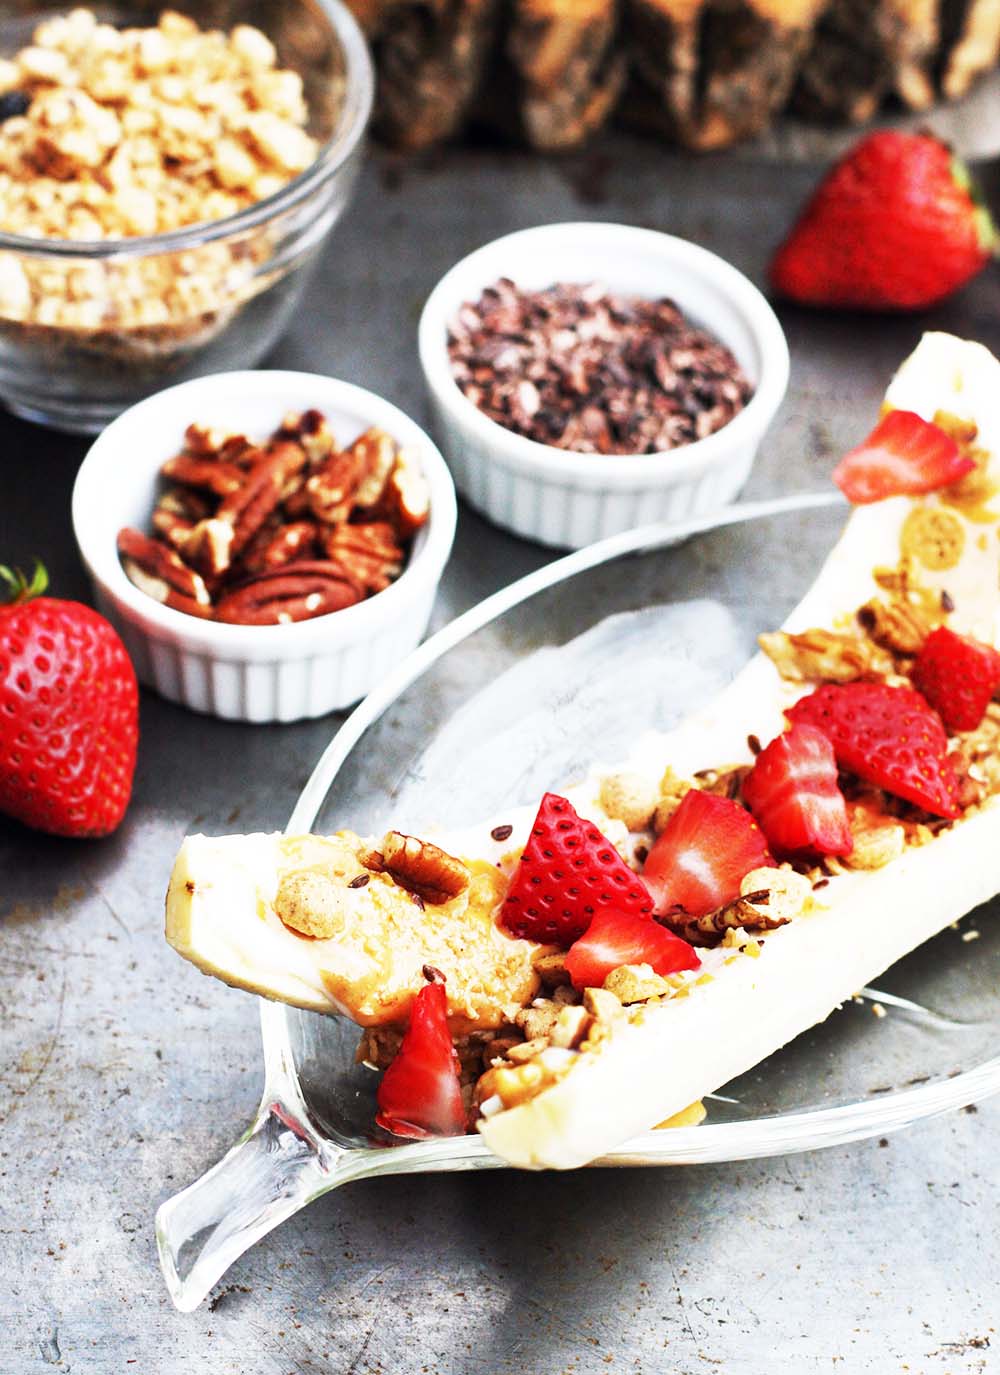 Breakfast banana splits: Get the recipe for this affordable, budget-friendly breakfast foods.